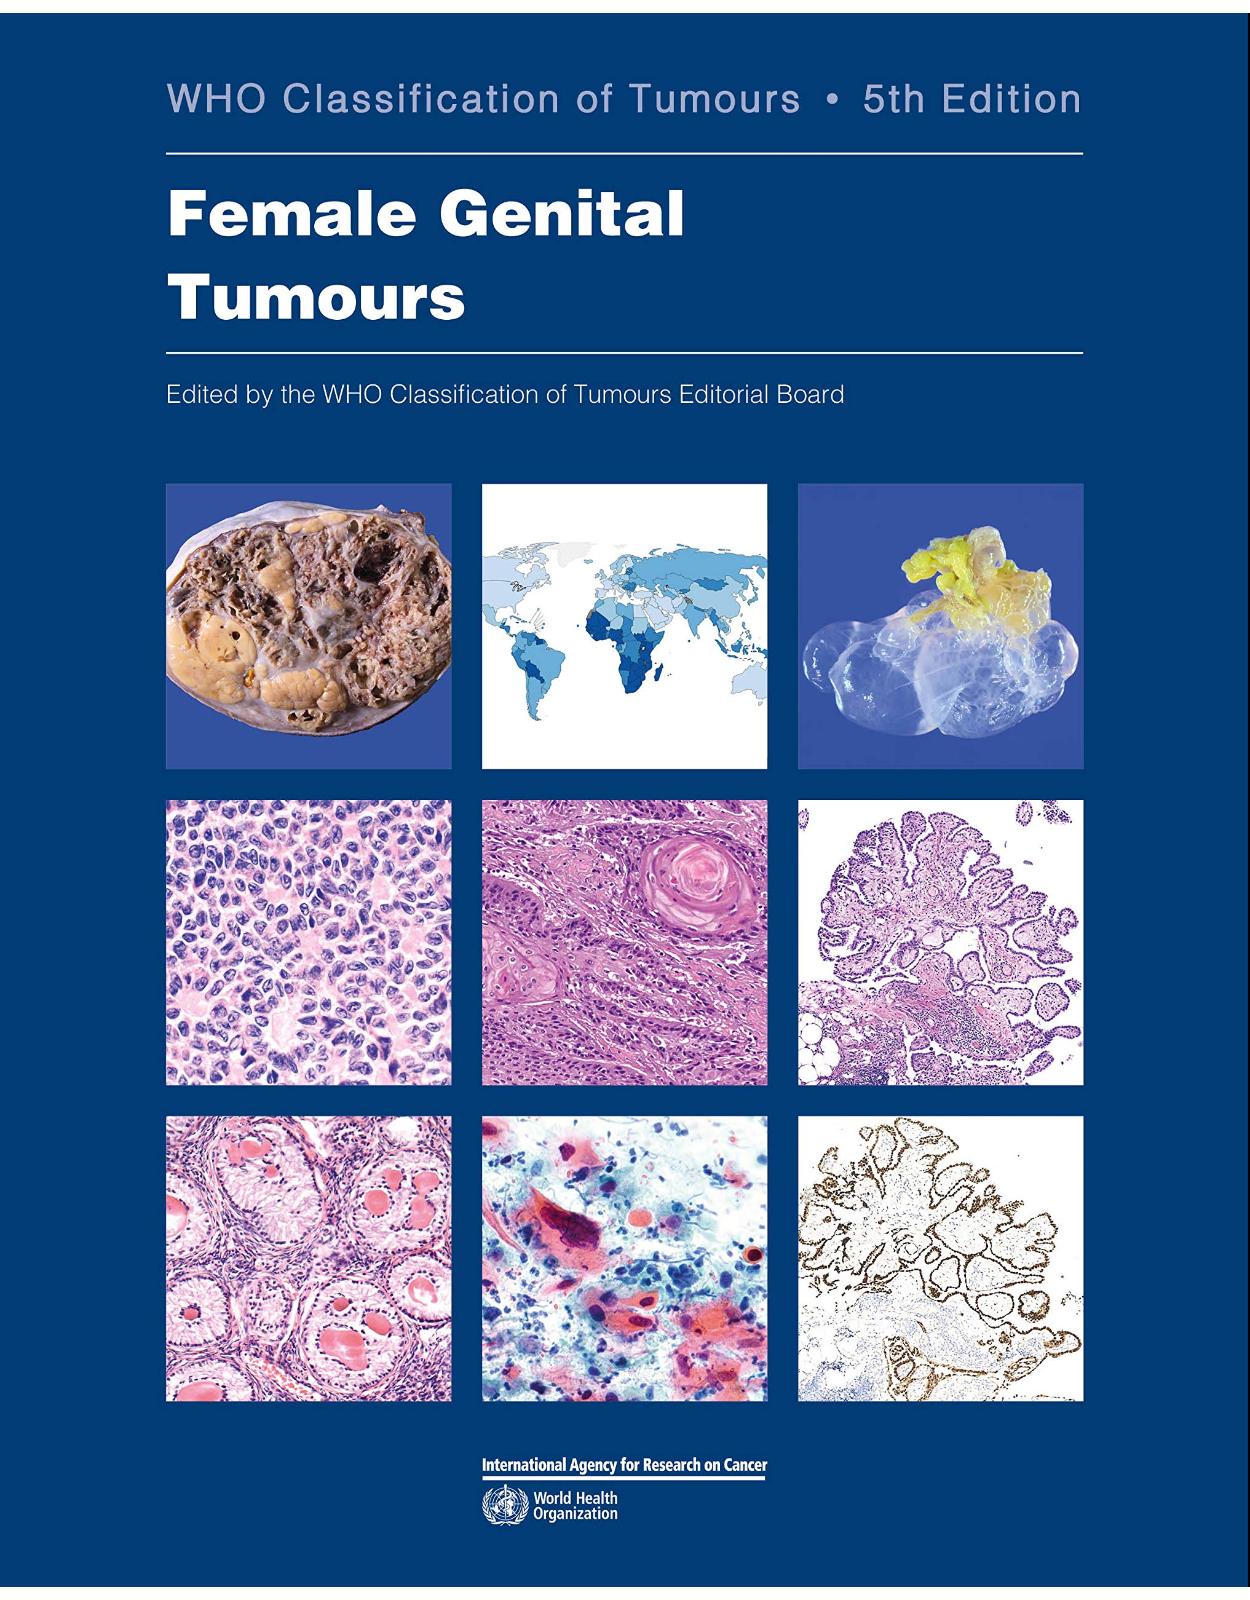 WHO classification of female genital tumours: Who Classification of Tumours 